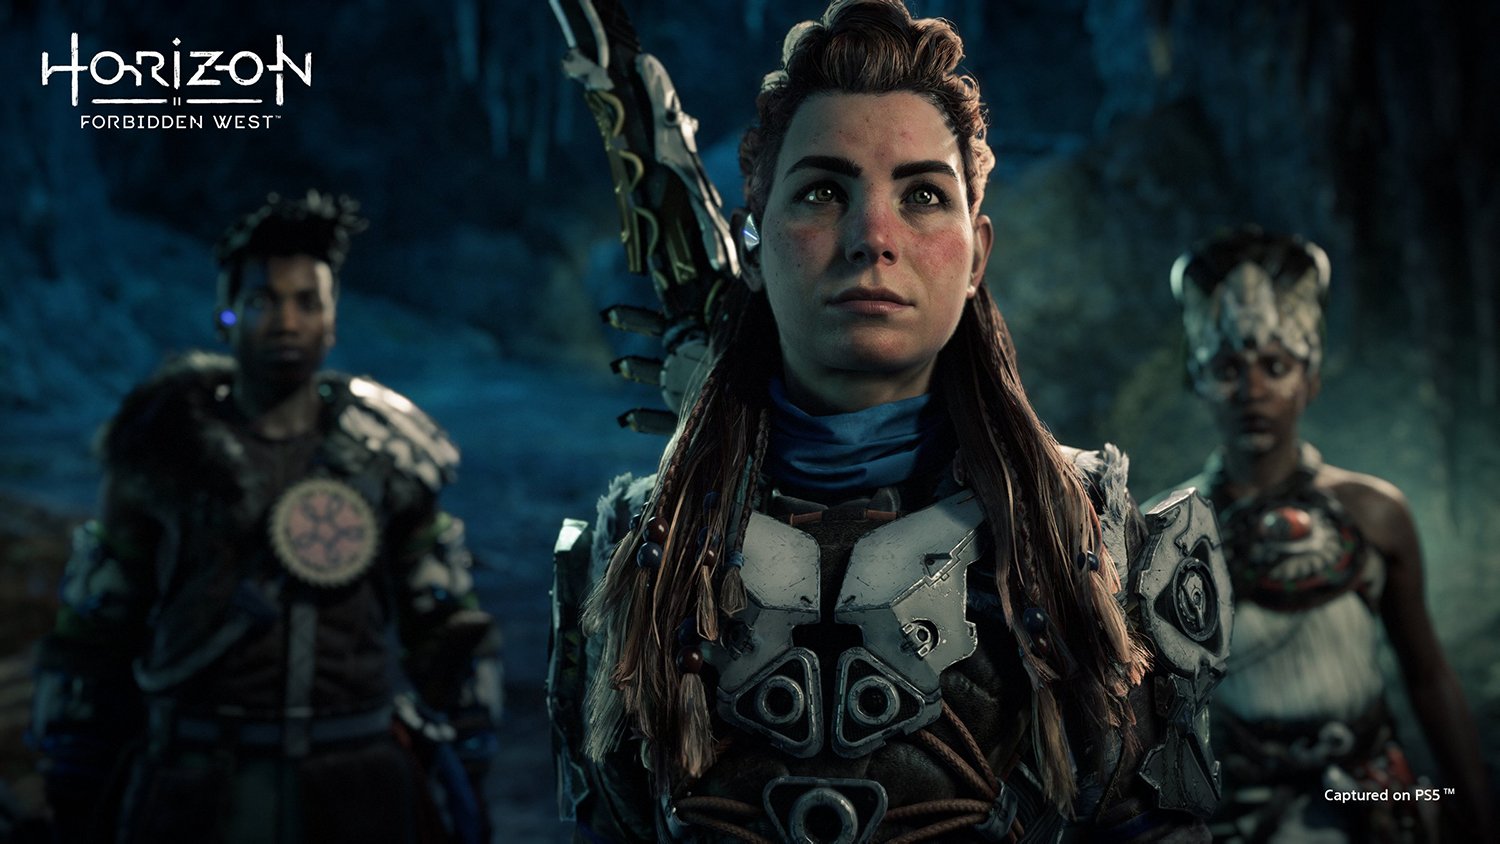 Aloy and company in Horizon Forbidden West, which has been primarily praised in review roundups.